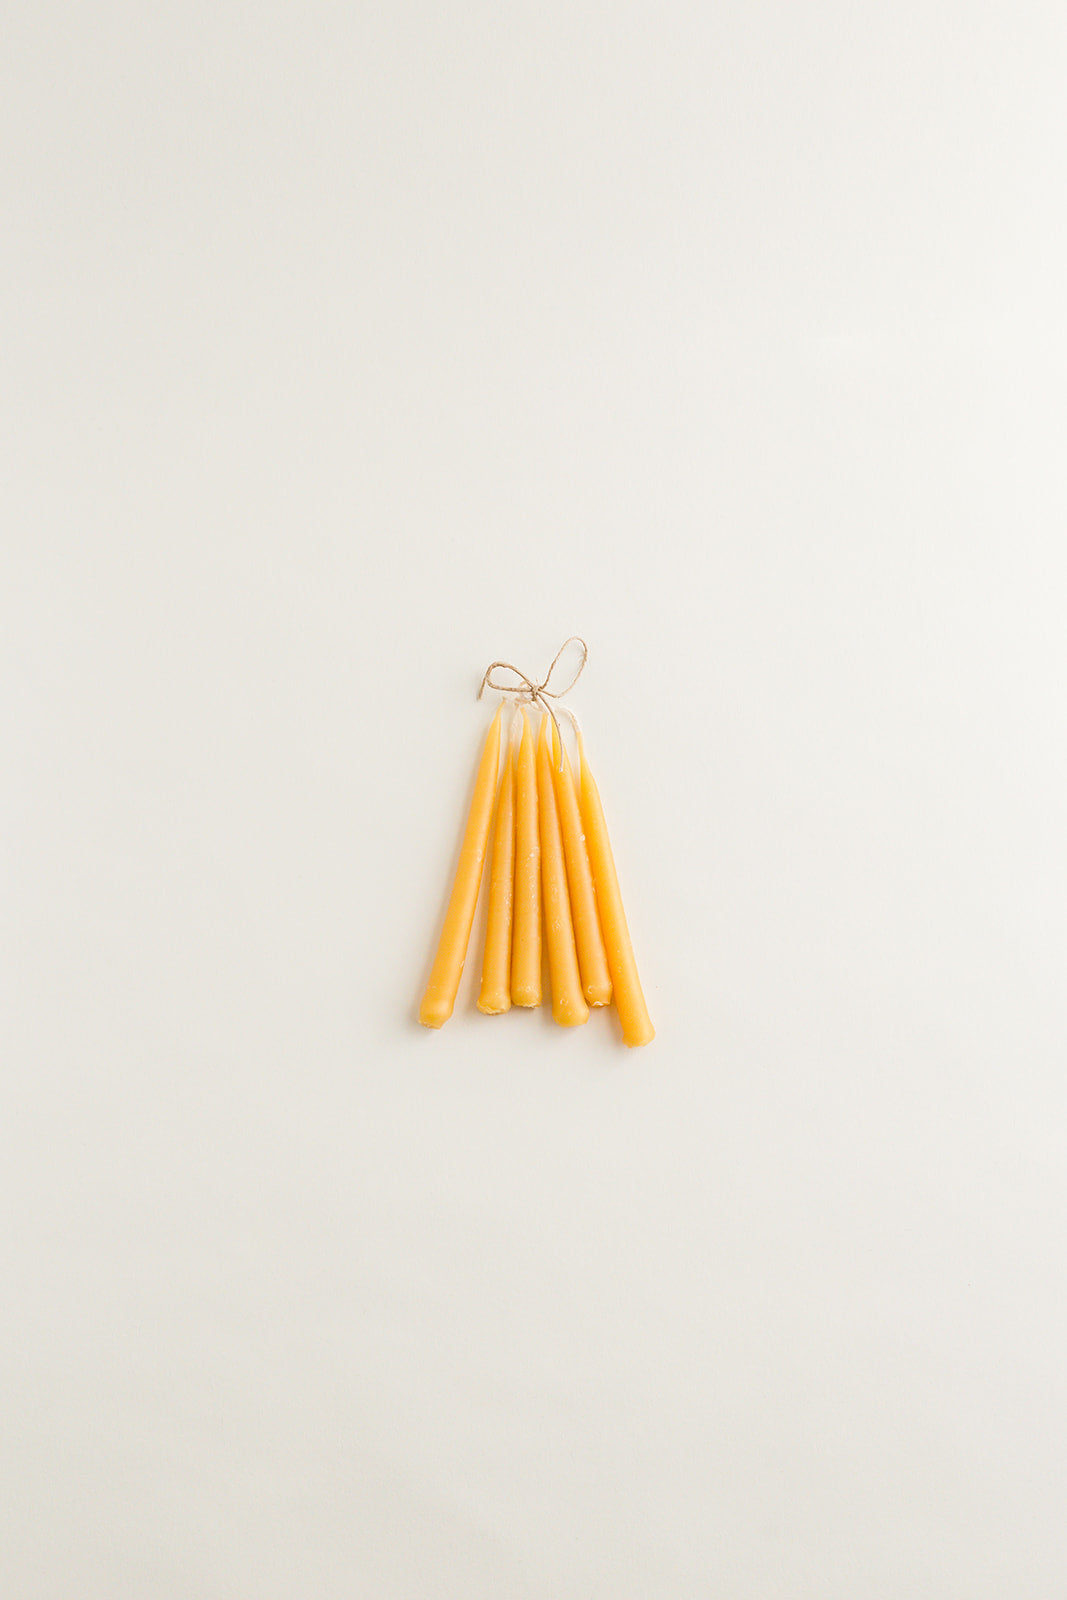 Birthday Beeswax Candles